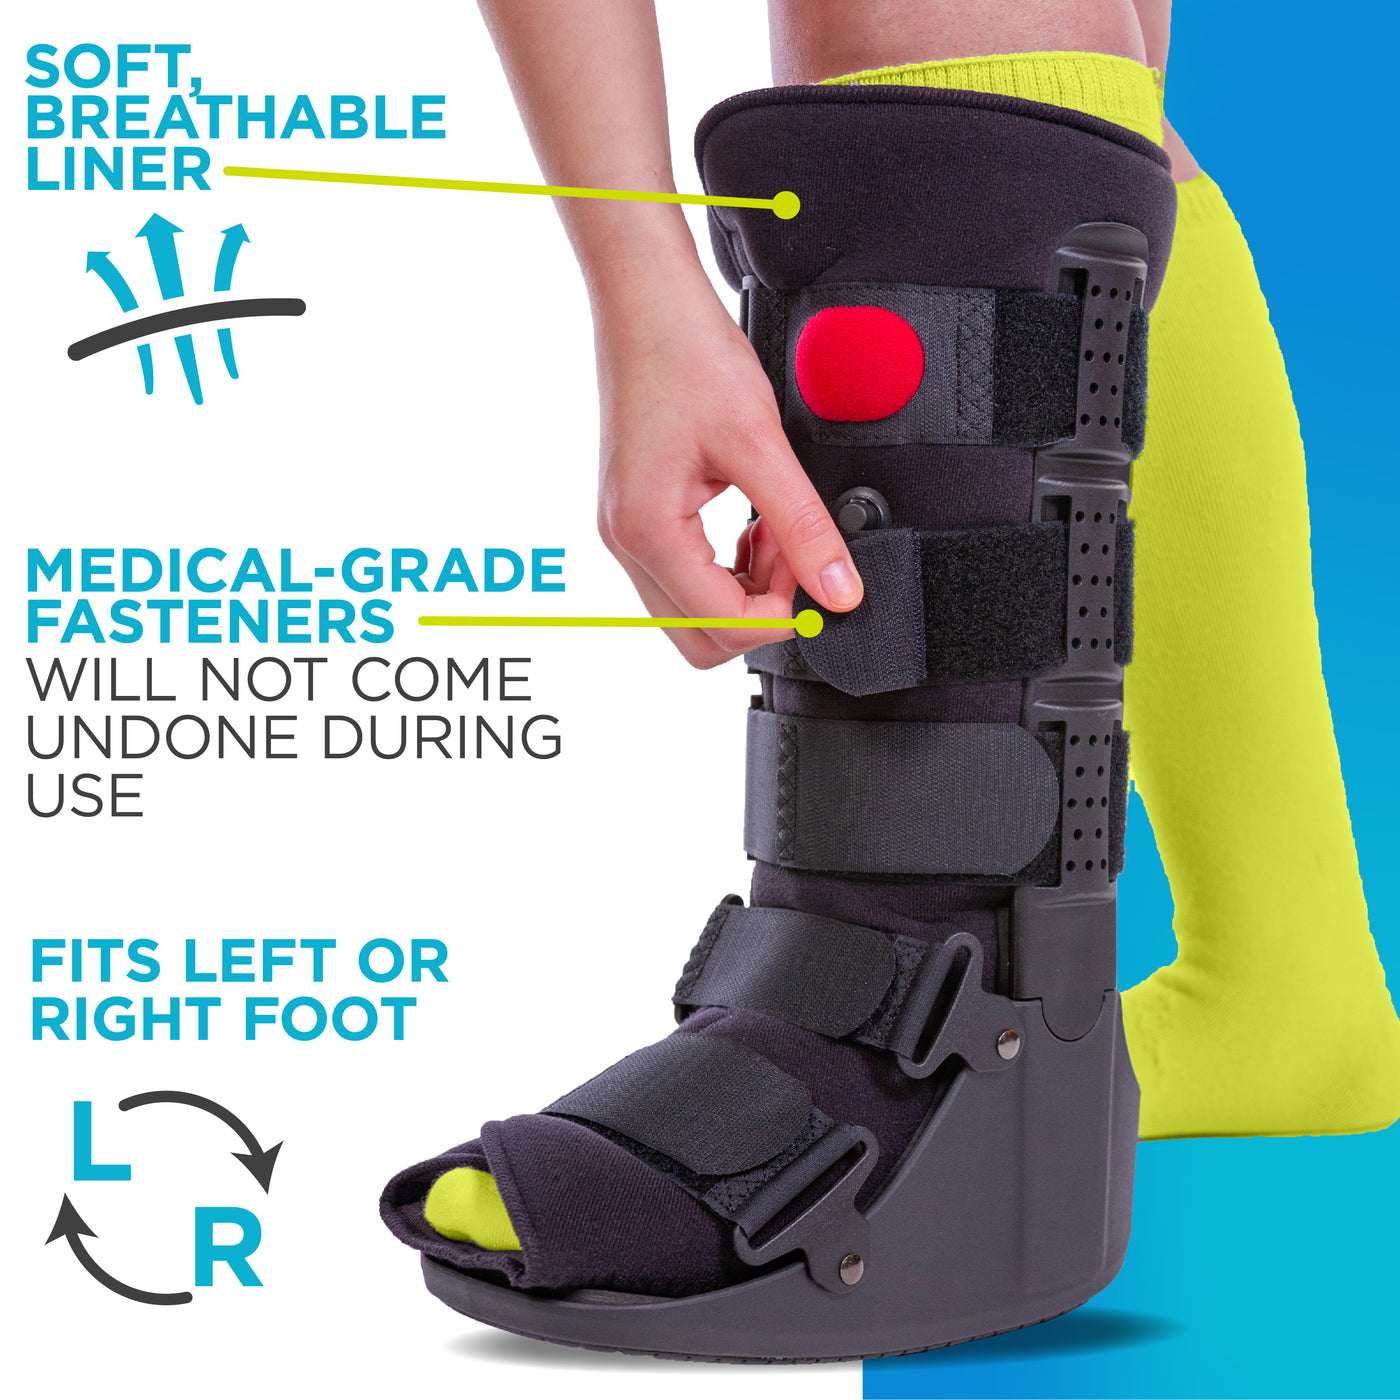 Our orthopedic cam air walker cast fits left or right ankle and has a breathable liner